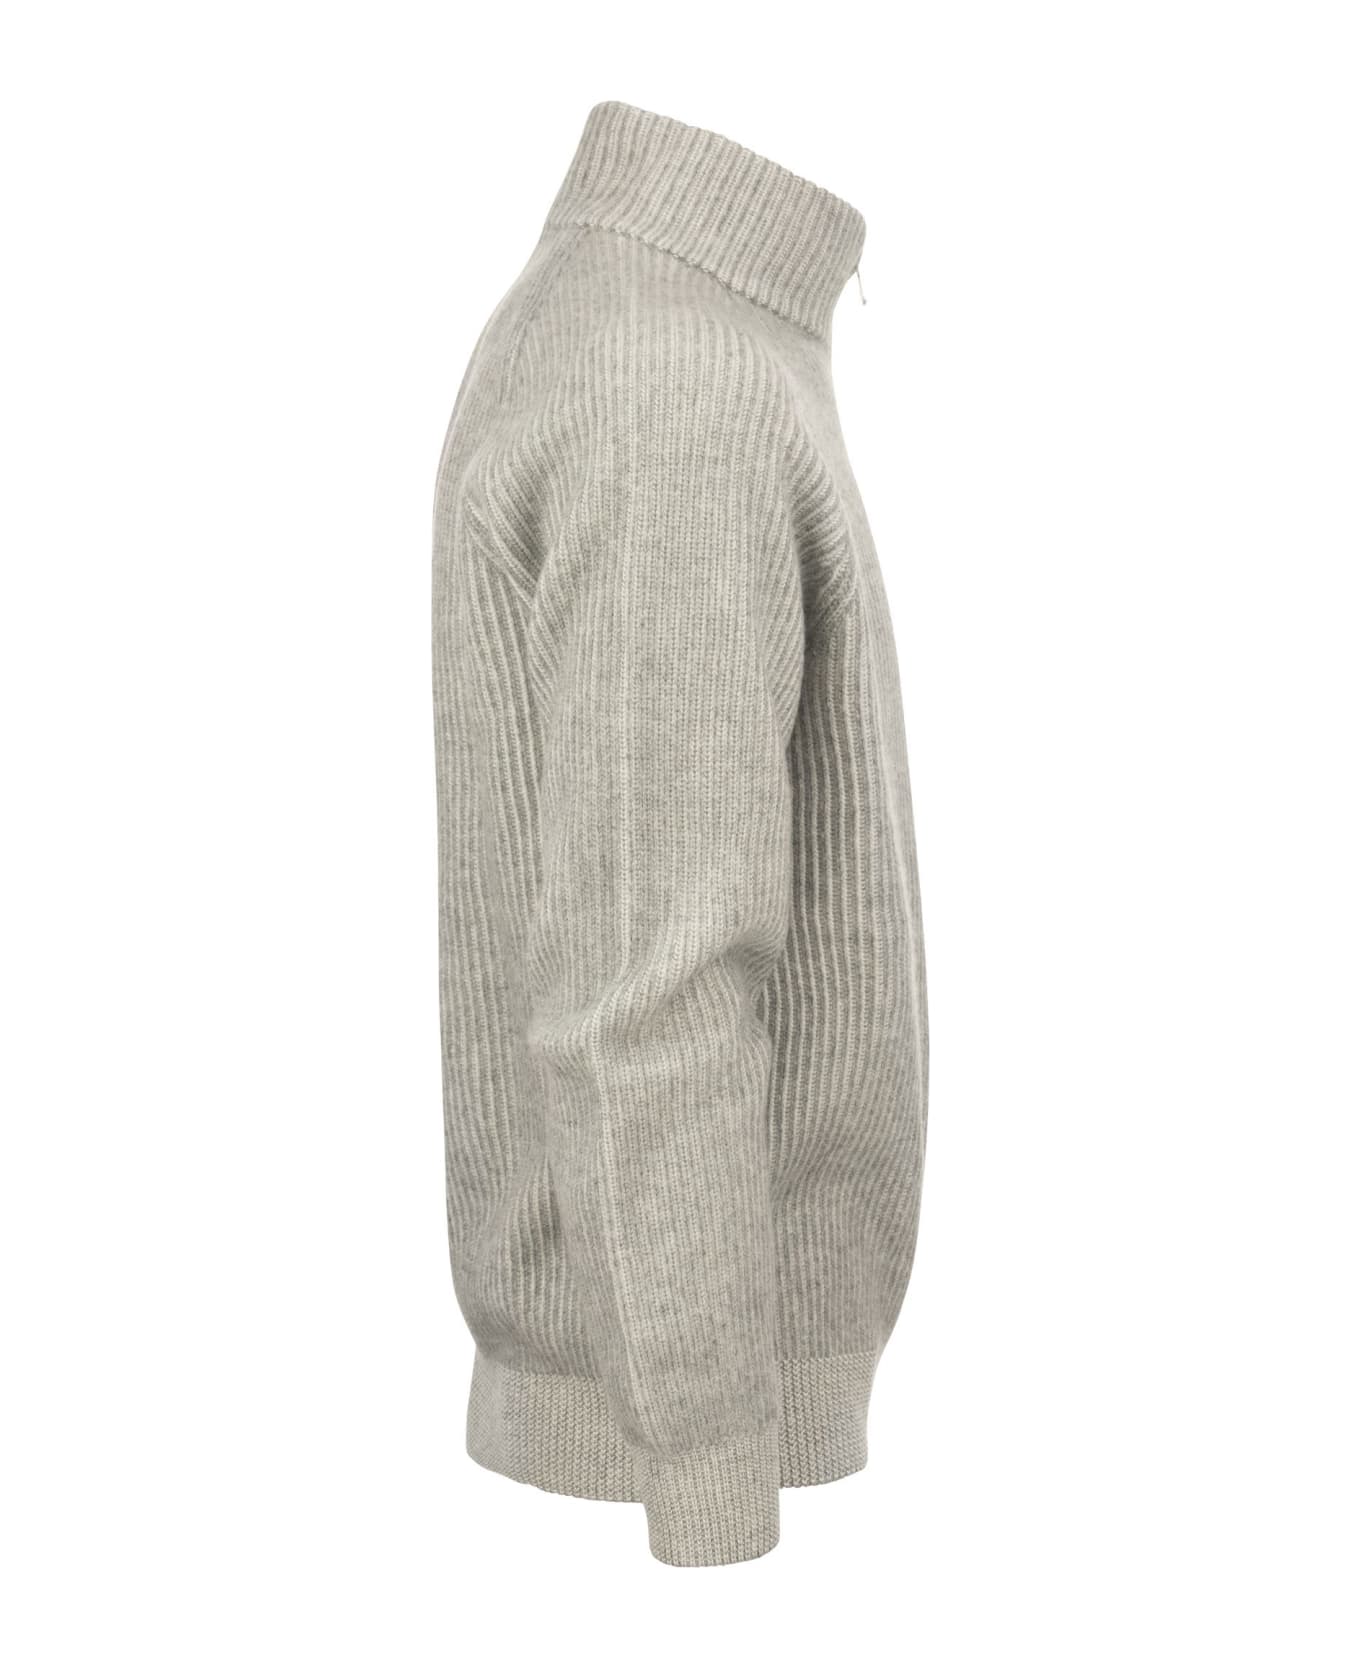 Brunello Cucinelli Zipped Cardigan Sweater With High Vanisè Collar In Cashmere - Grey ニットウェア